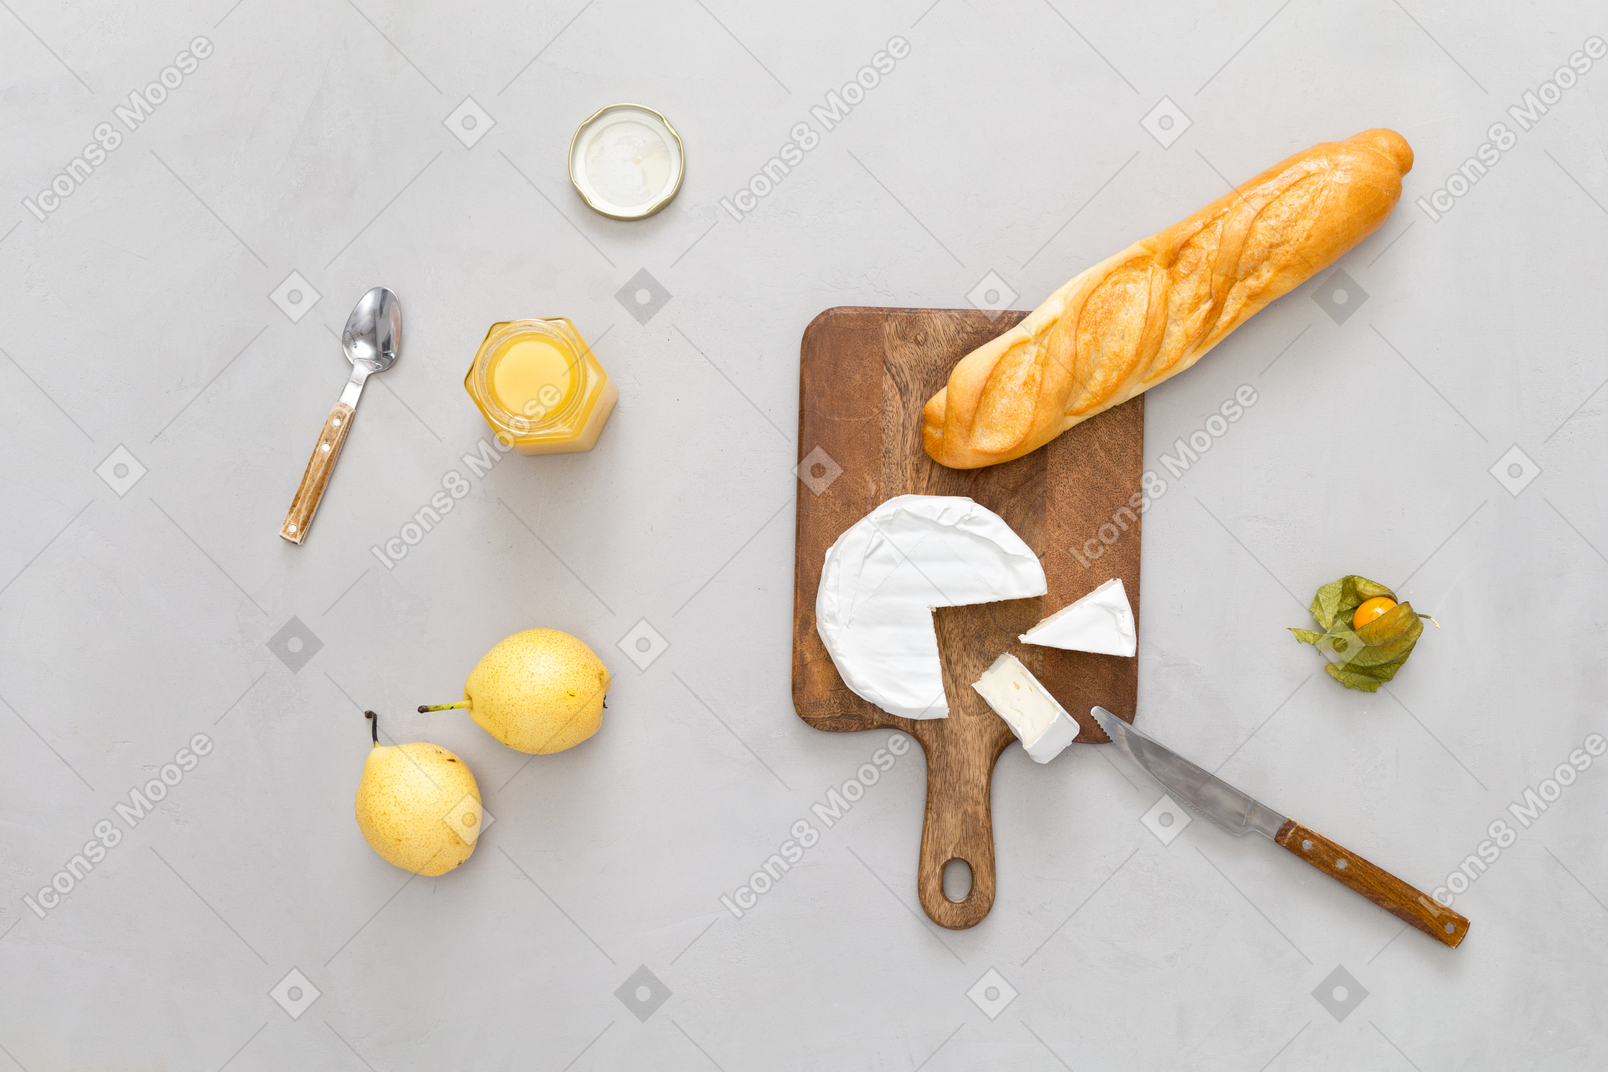 Cutting board with some baguette and cheese, some pears and honey